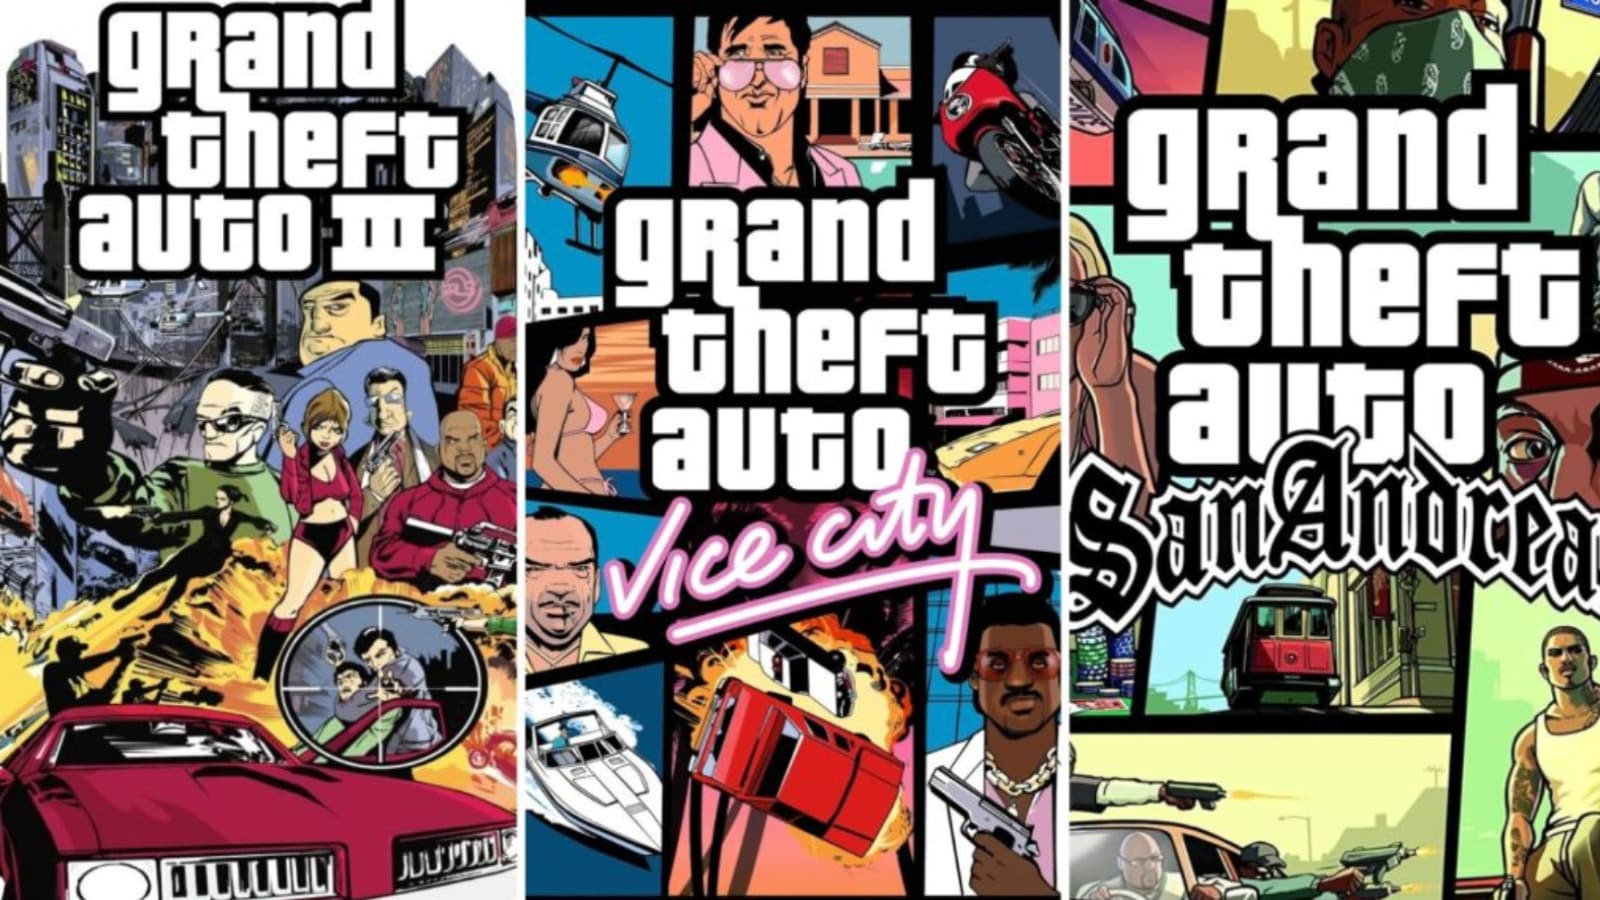 GTA Trilogy remasters will have GTA 5 controls according to leak